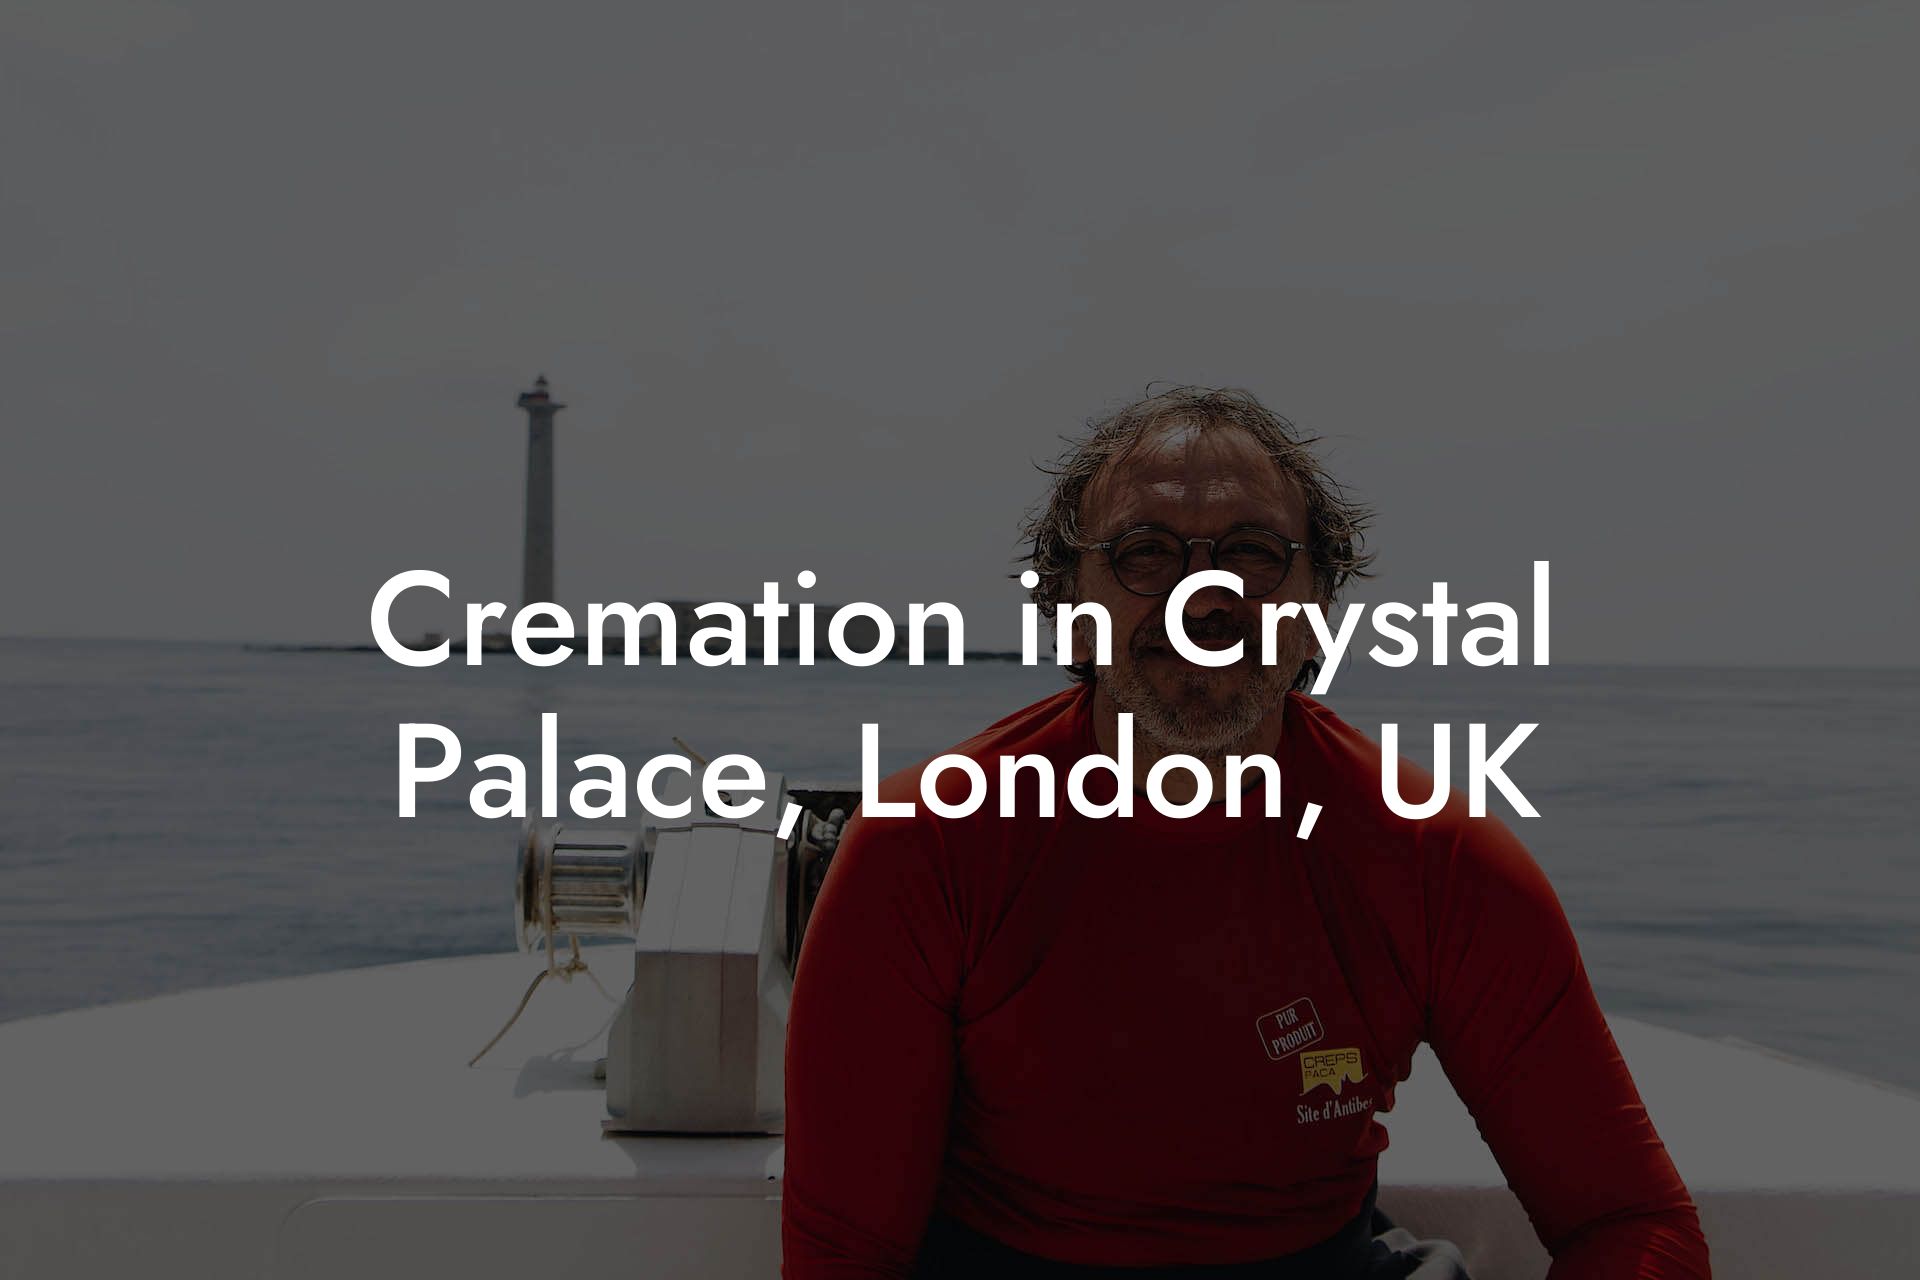 Cremation in Crystal Palace, London, UK